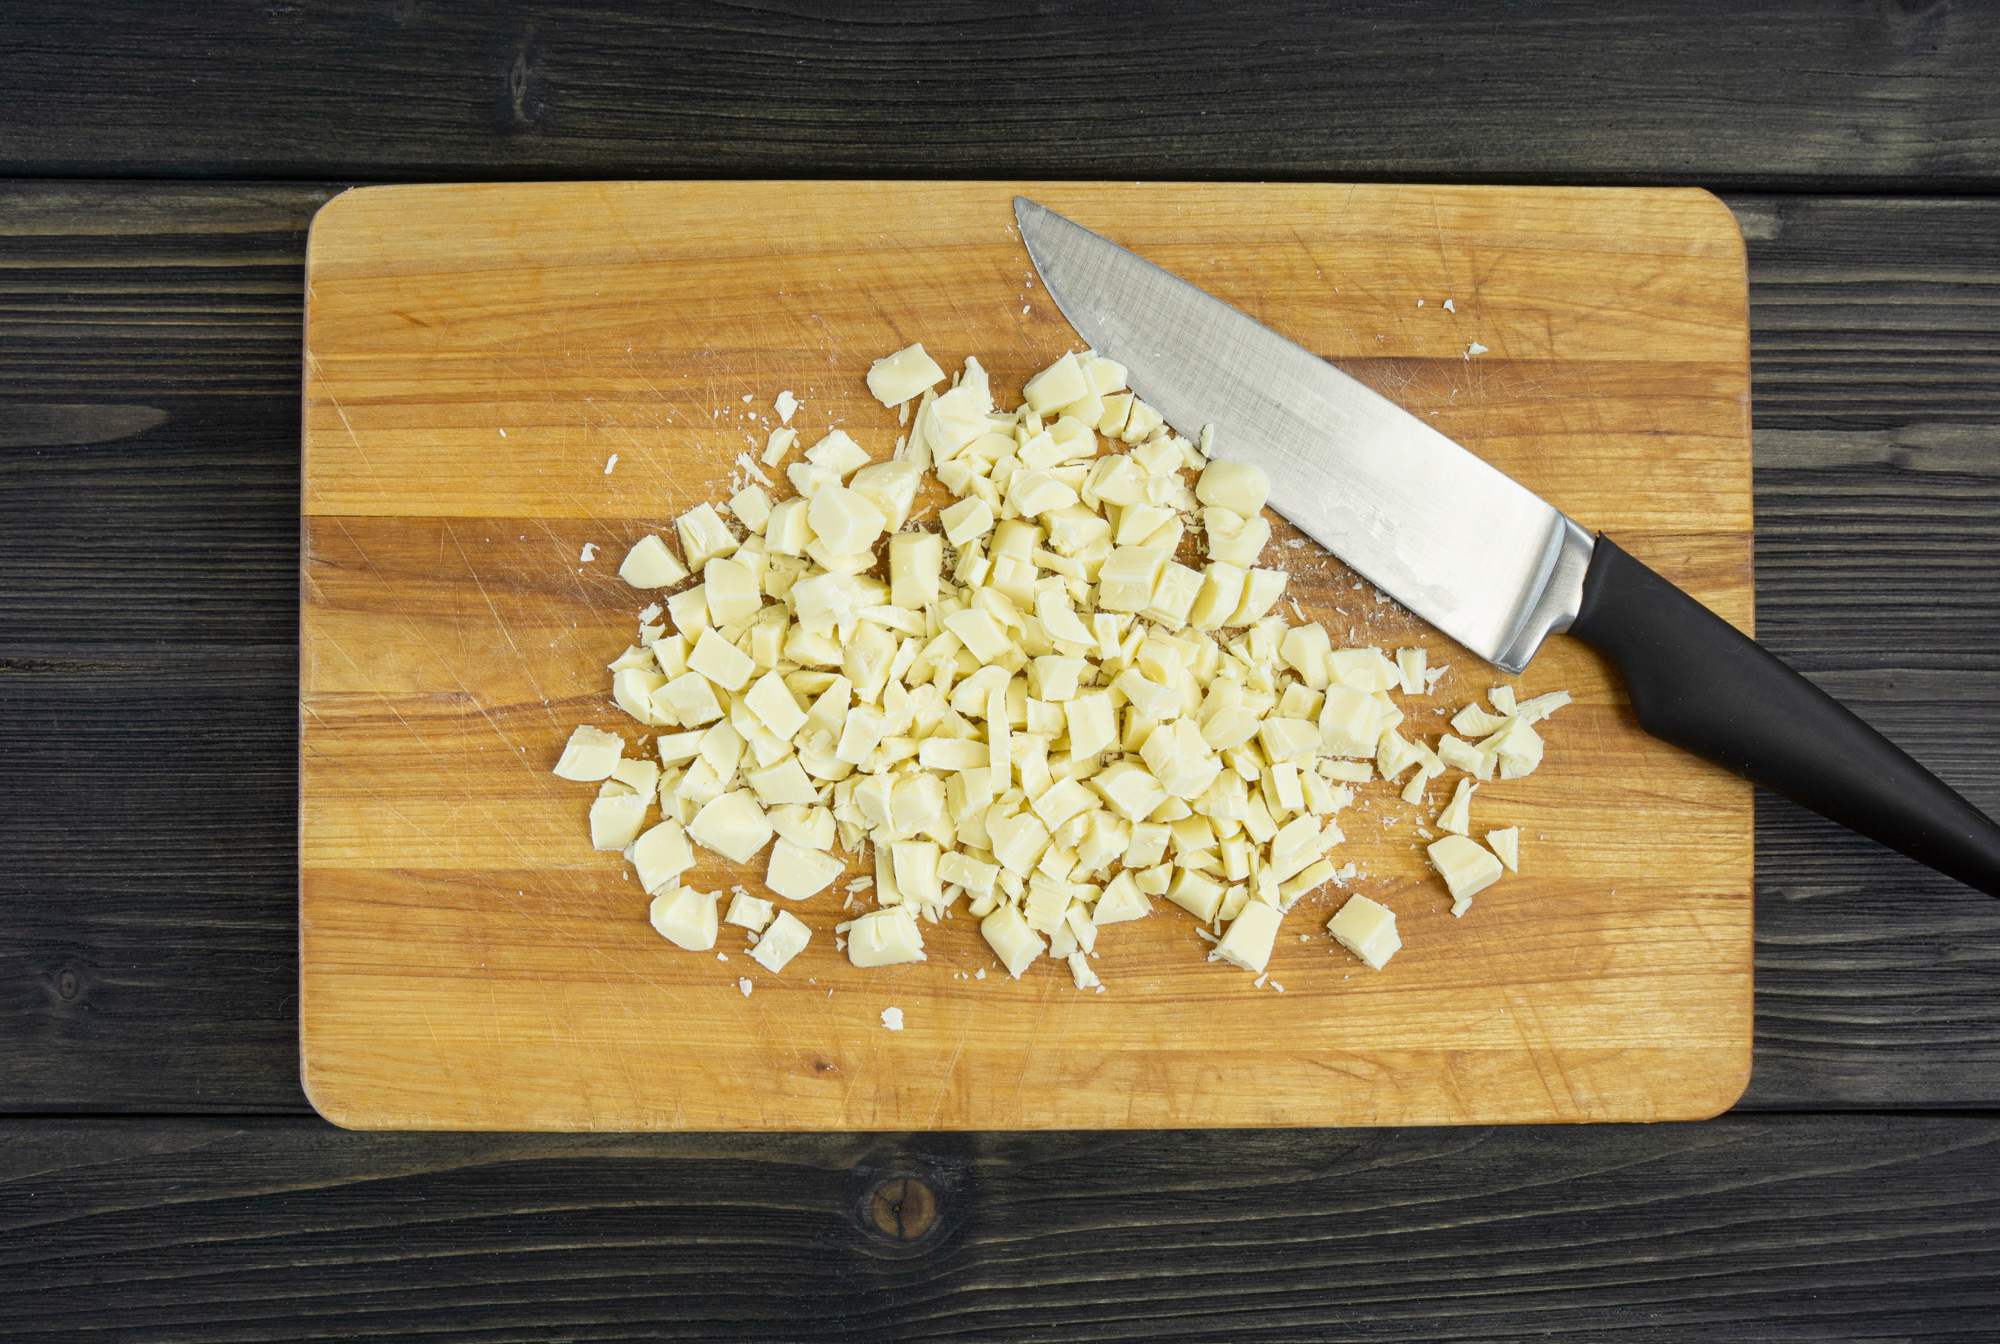 White chocolate chopped with a knife